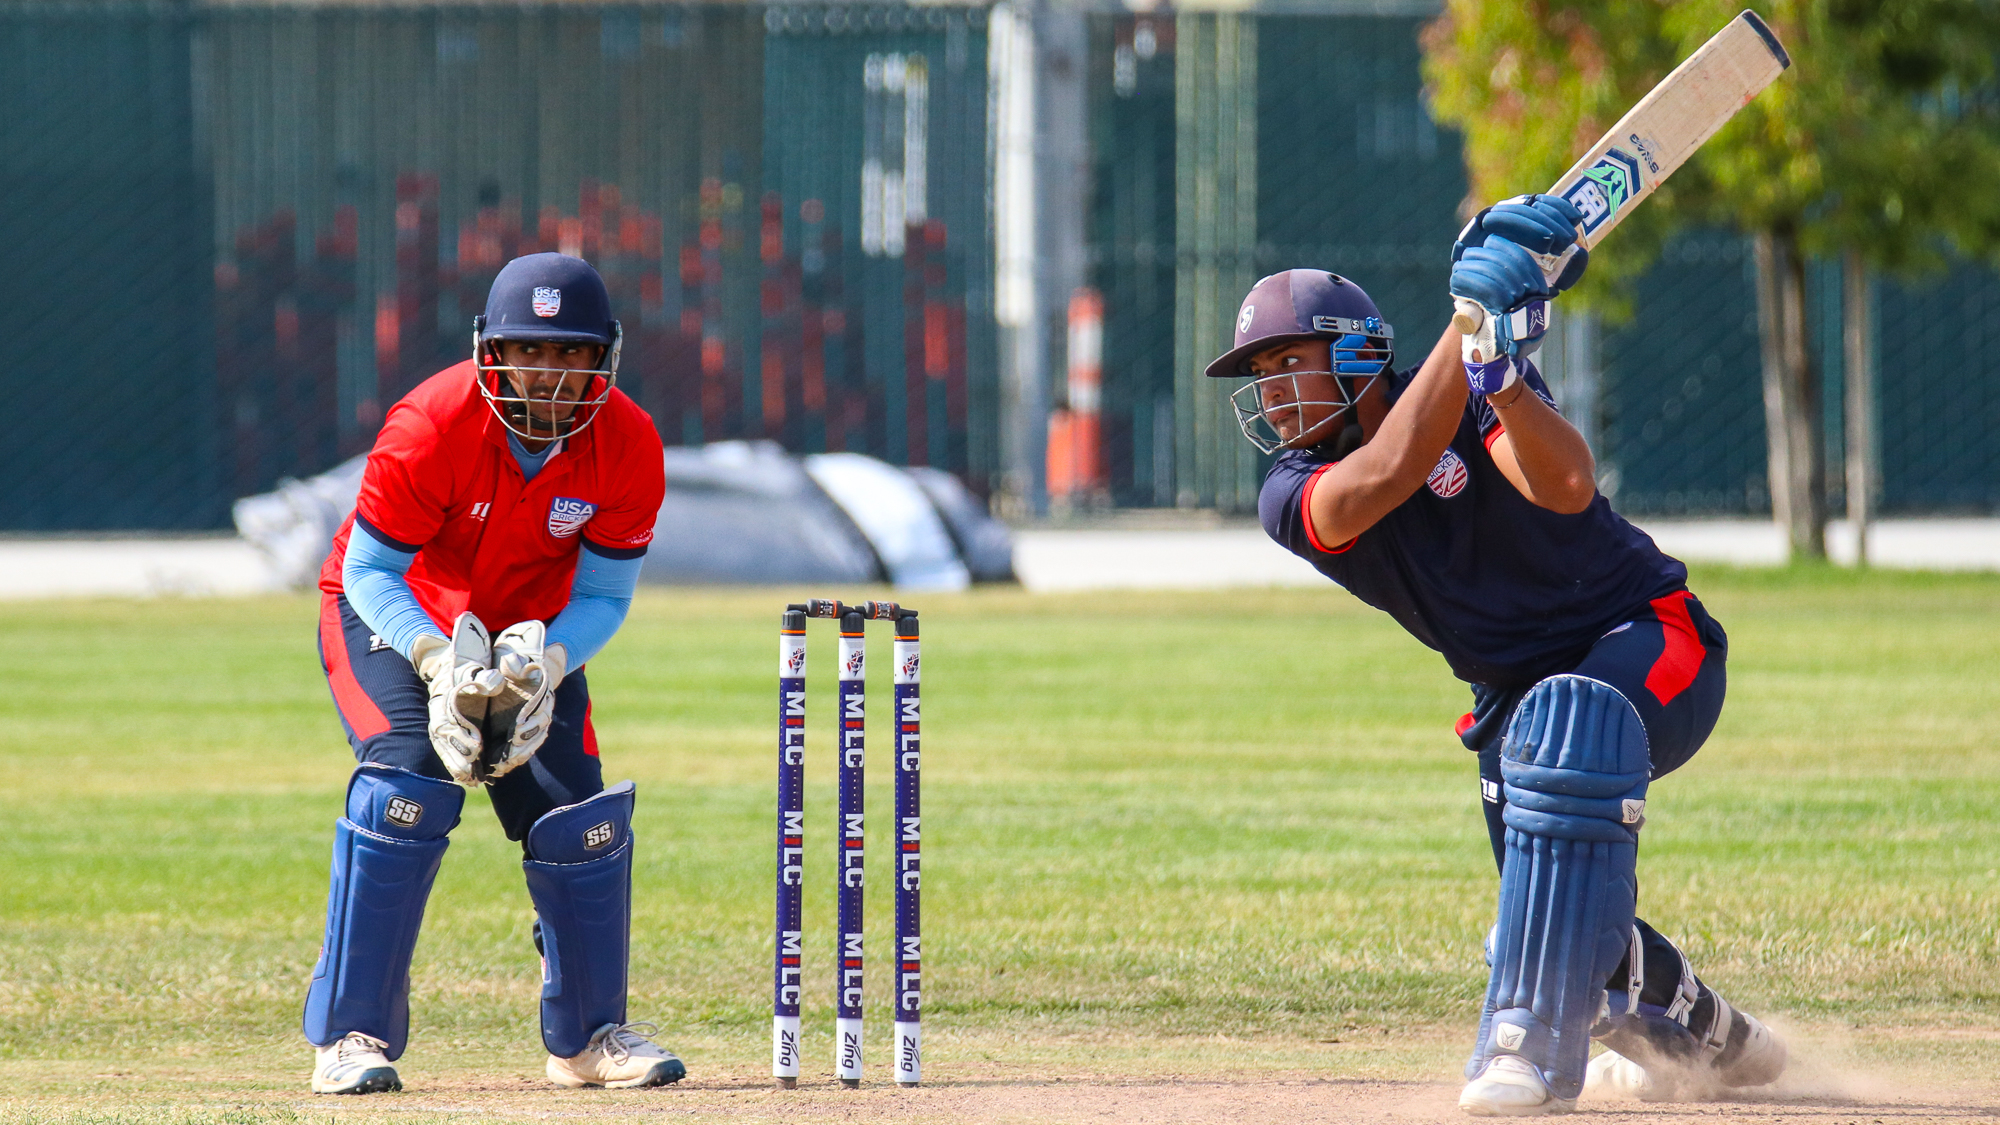 Cricket Community Encouraged to enjoy action at USA Cricket Men’s Under 19s Training Matches This Weekend